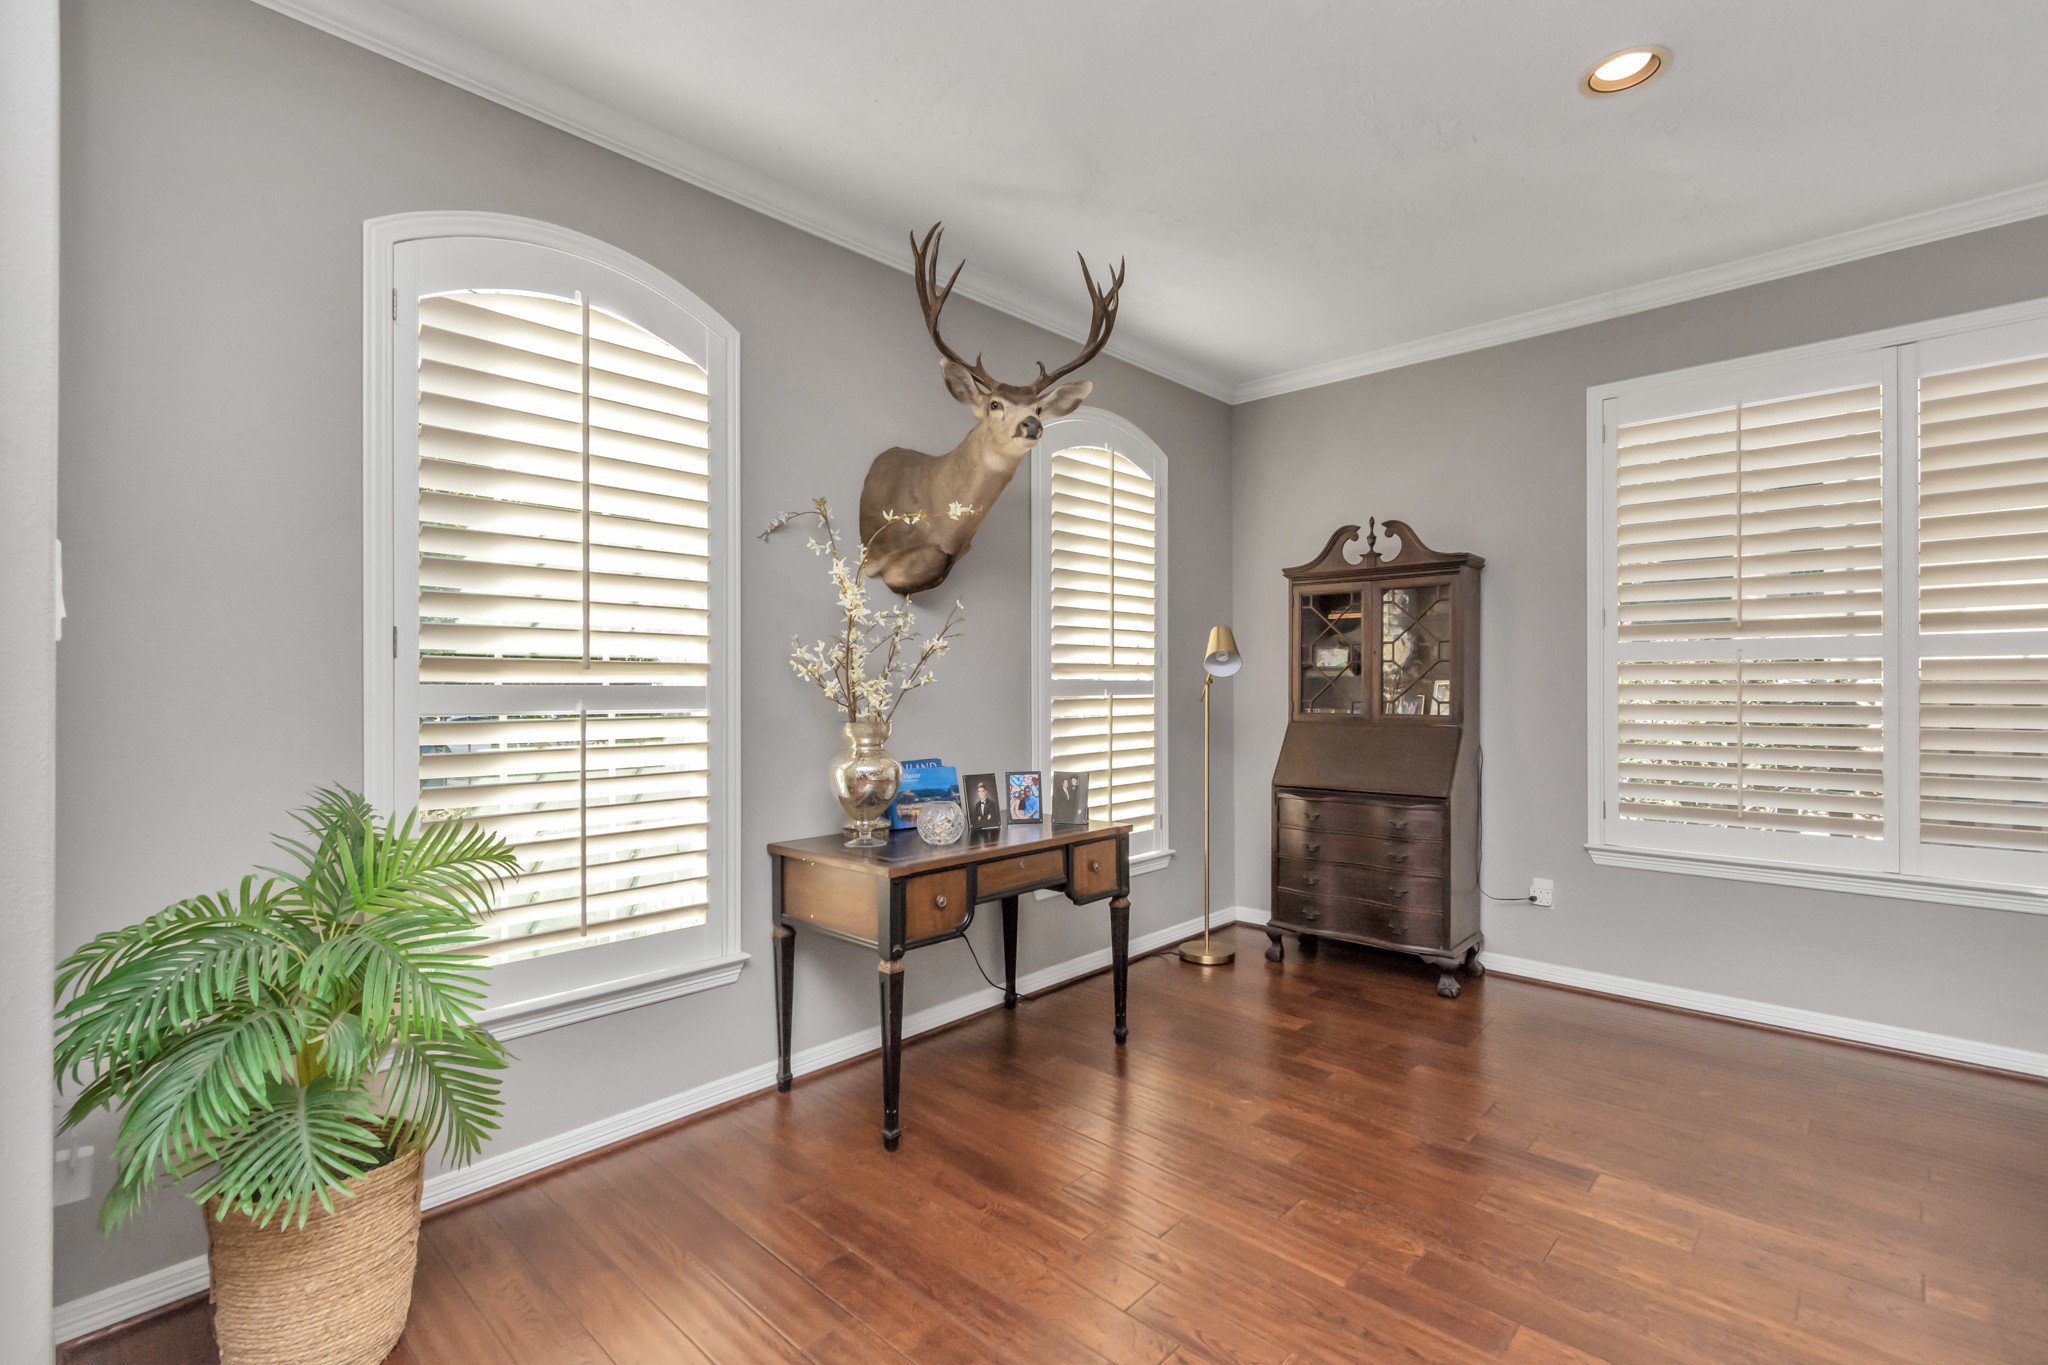 A significant perk of this home lies in the uniformity brought by the plantation shutters adorning each window.